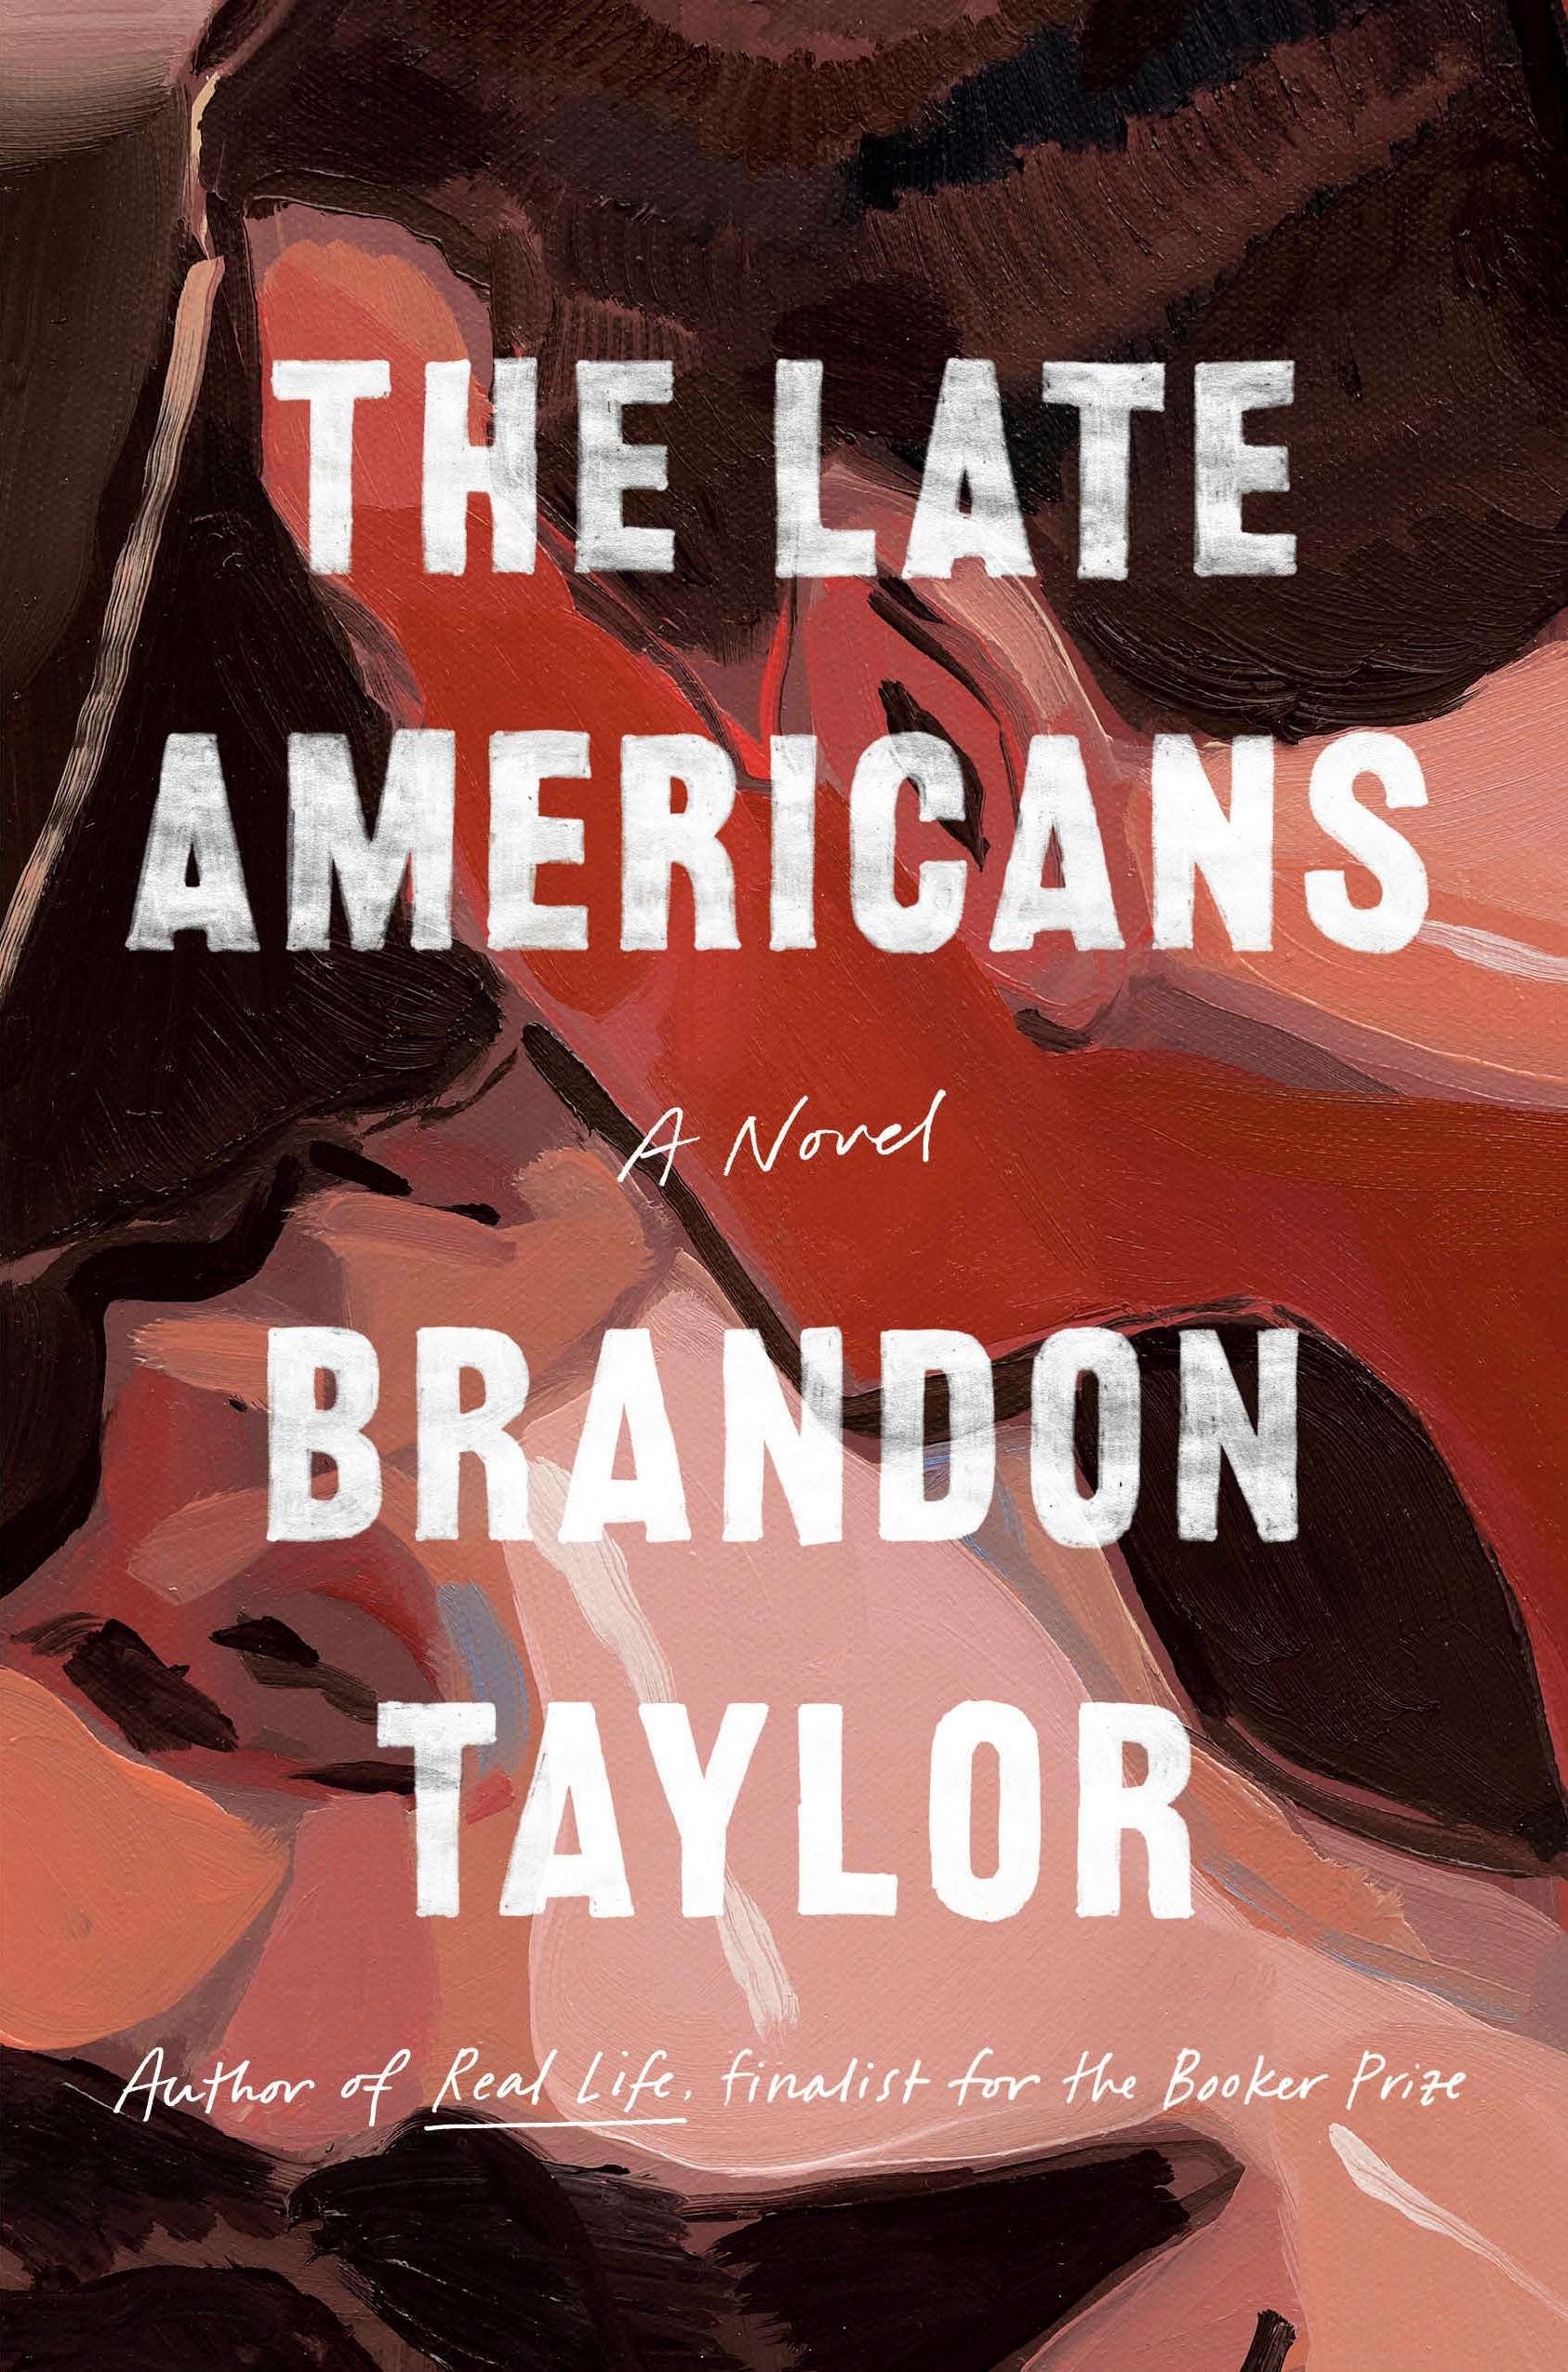 Book Review - The Late Americans